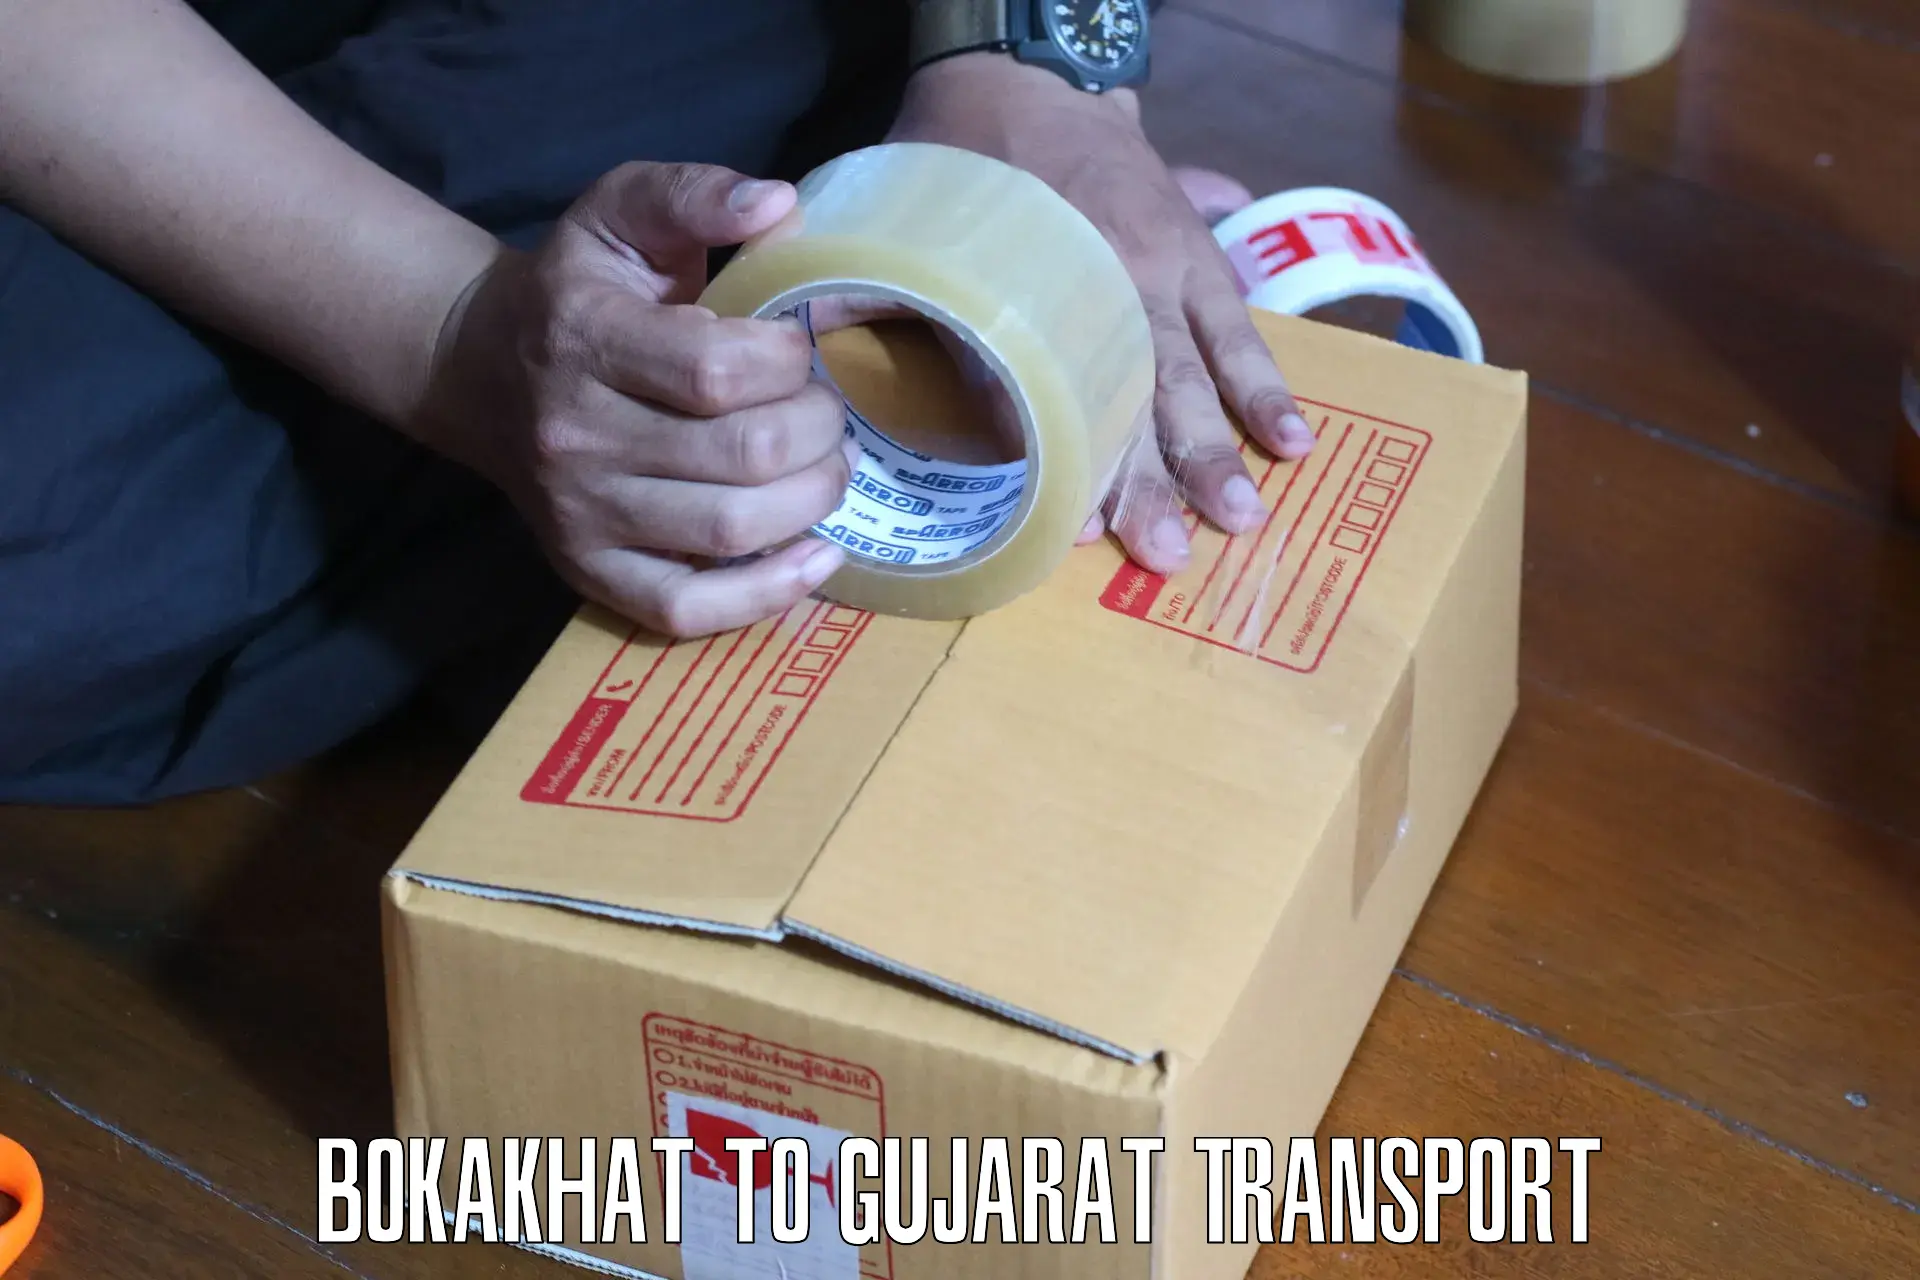 Truck transport companies in India Bokakhat to Gujarat